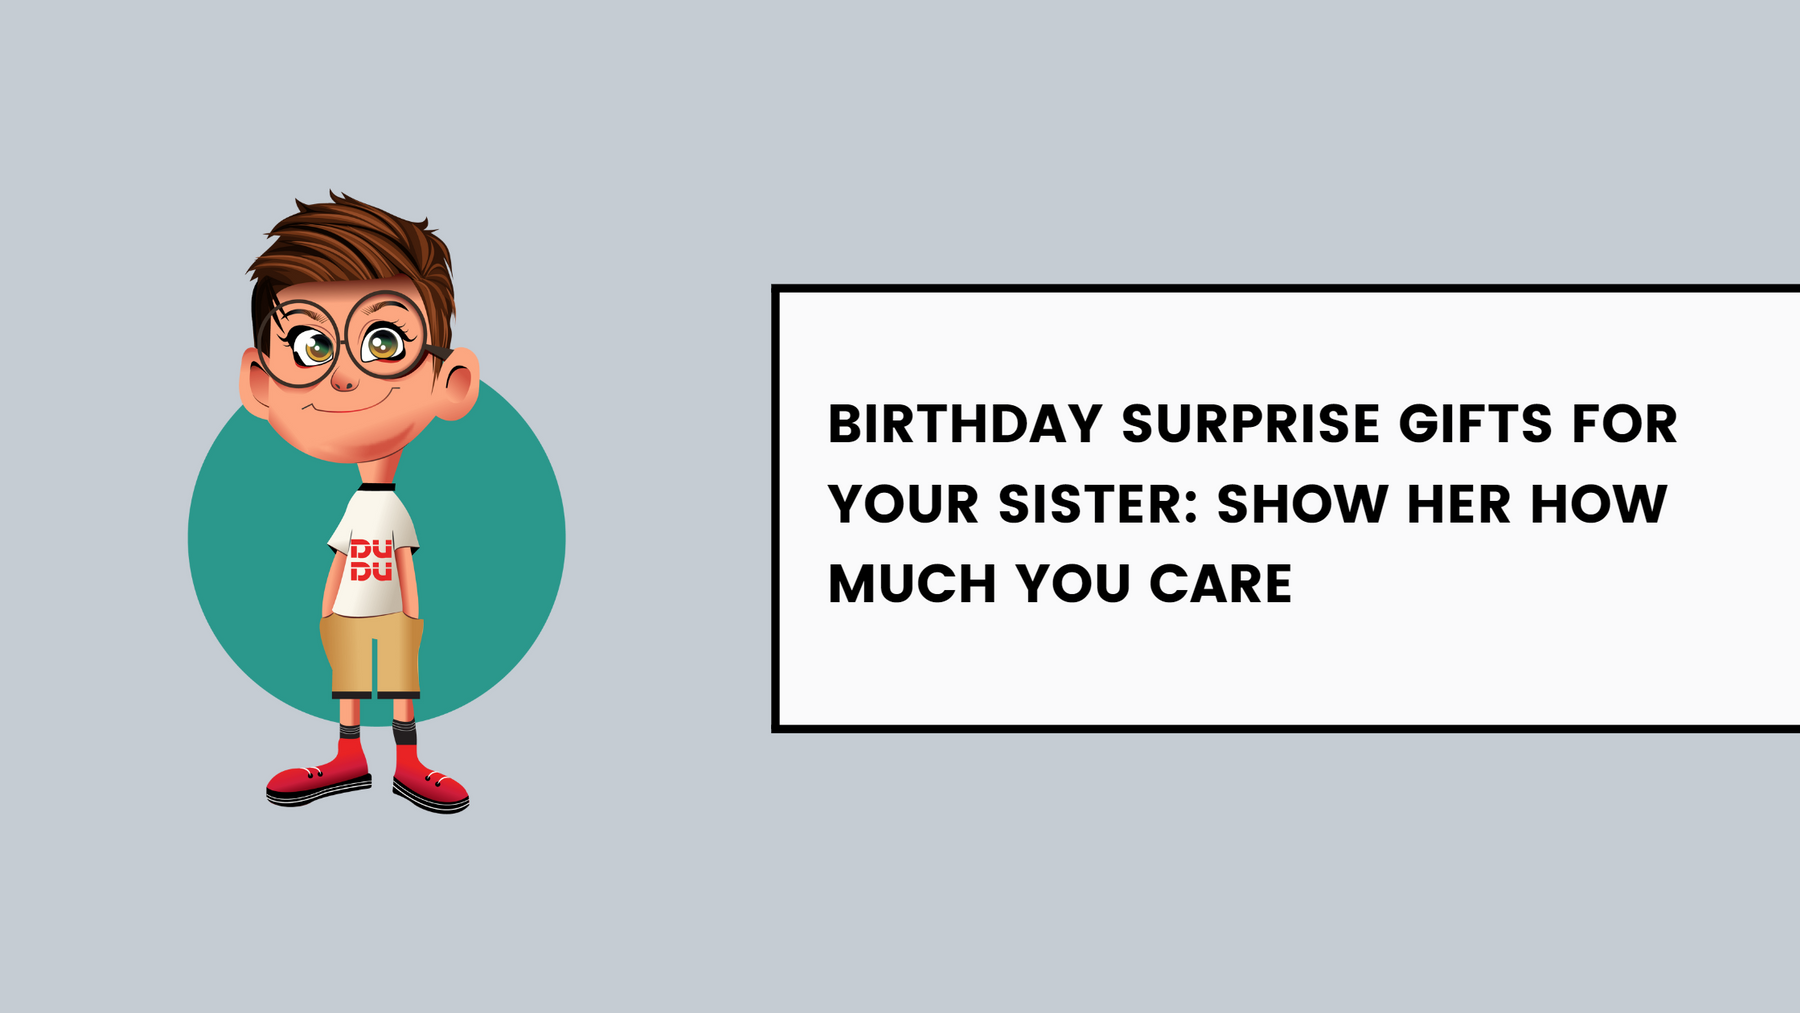 Birthday Surprise Gifts For Your Sister: Show Her How Much You Care